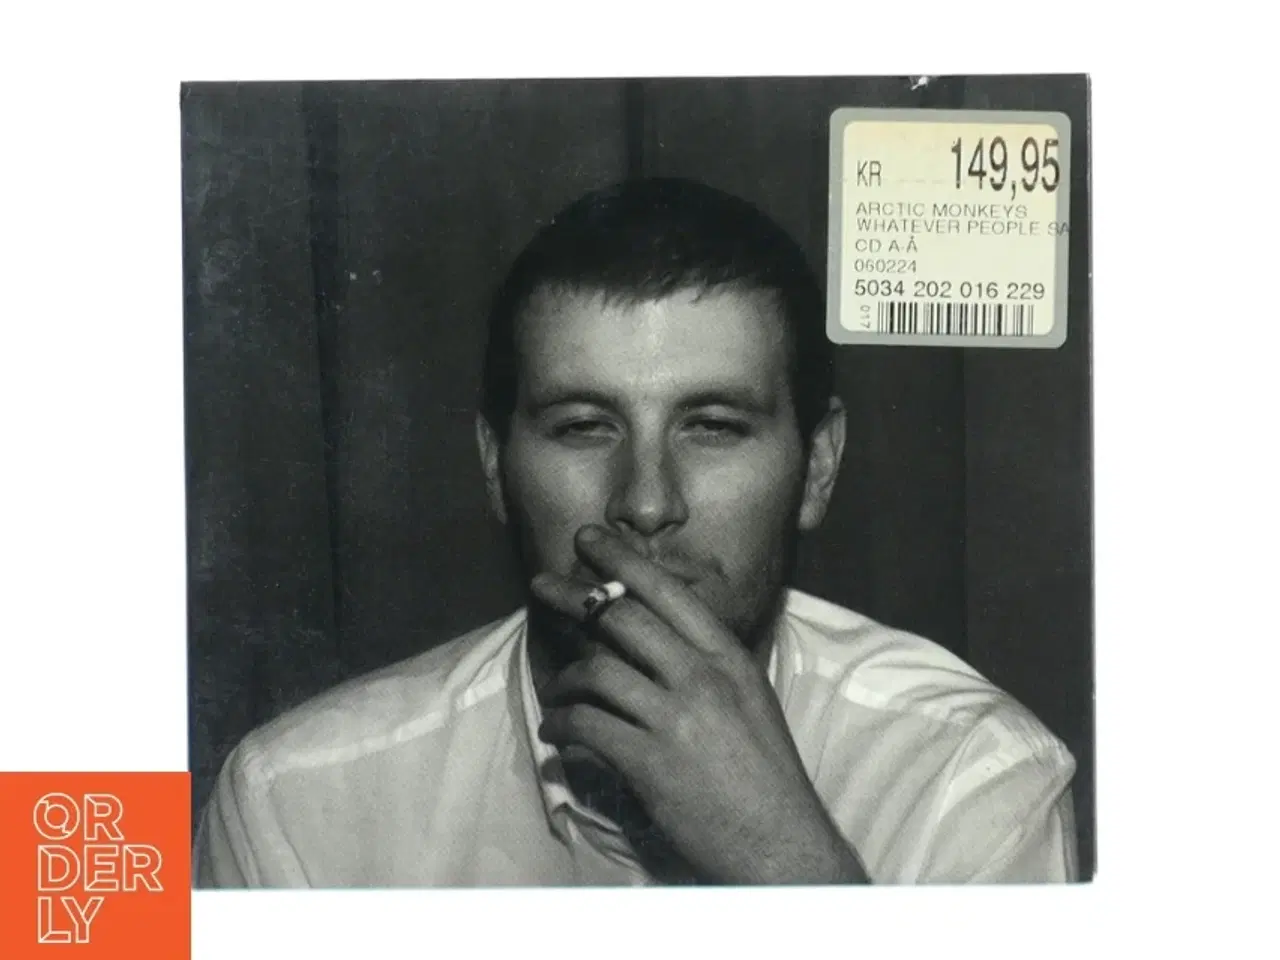 Billede 1 - Arctic Monkeys CD - Whatever People Say I Am, That's What I'm Not fra Domino